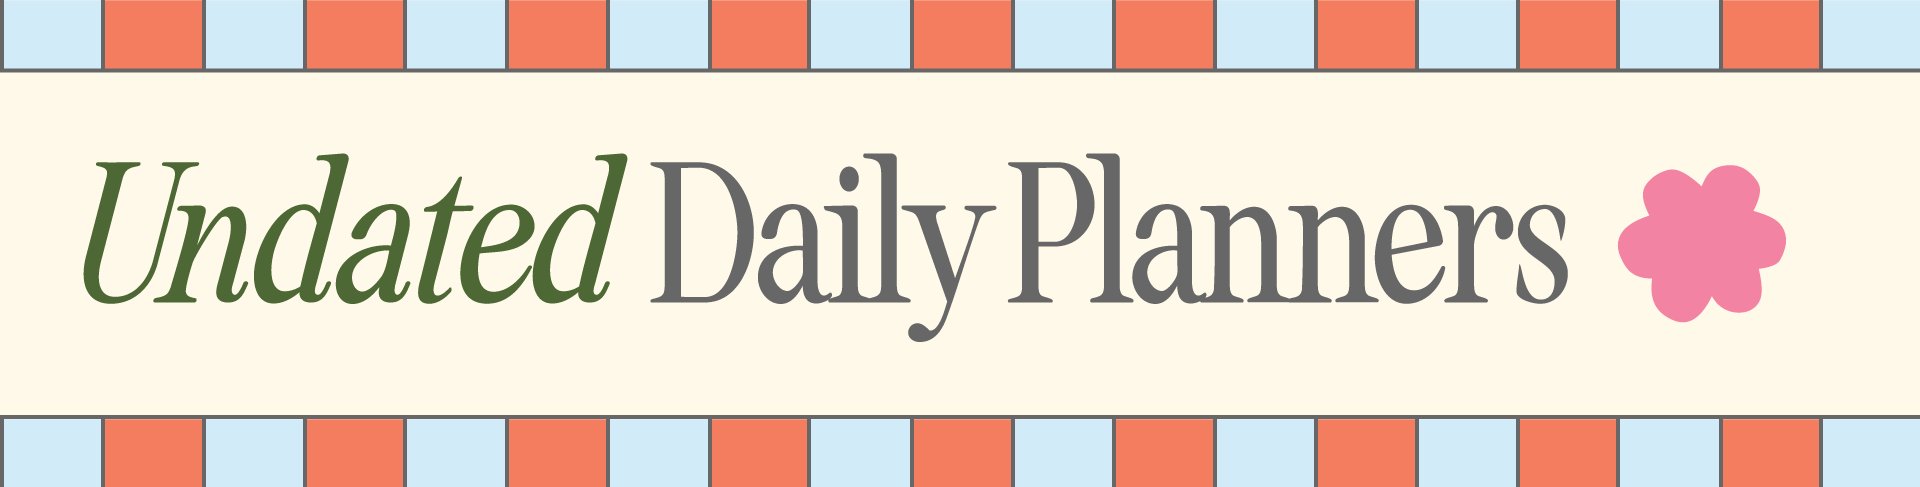 Daily Planners - Notcoy